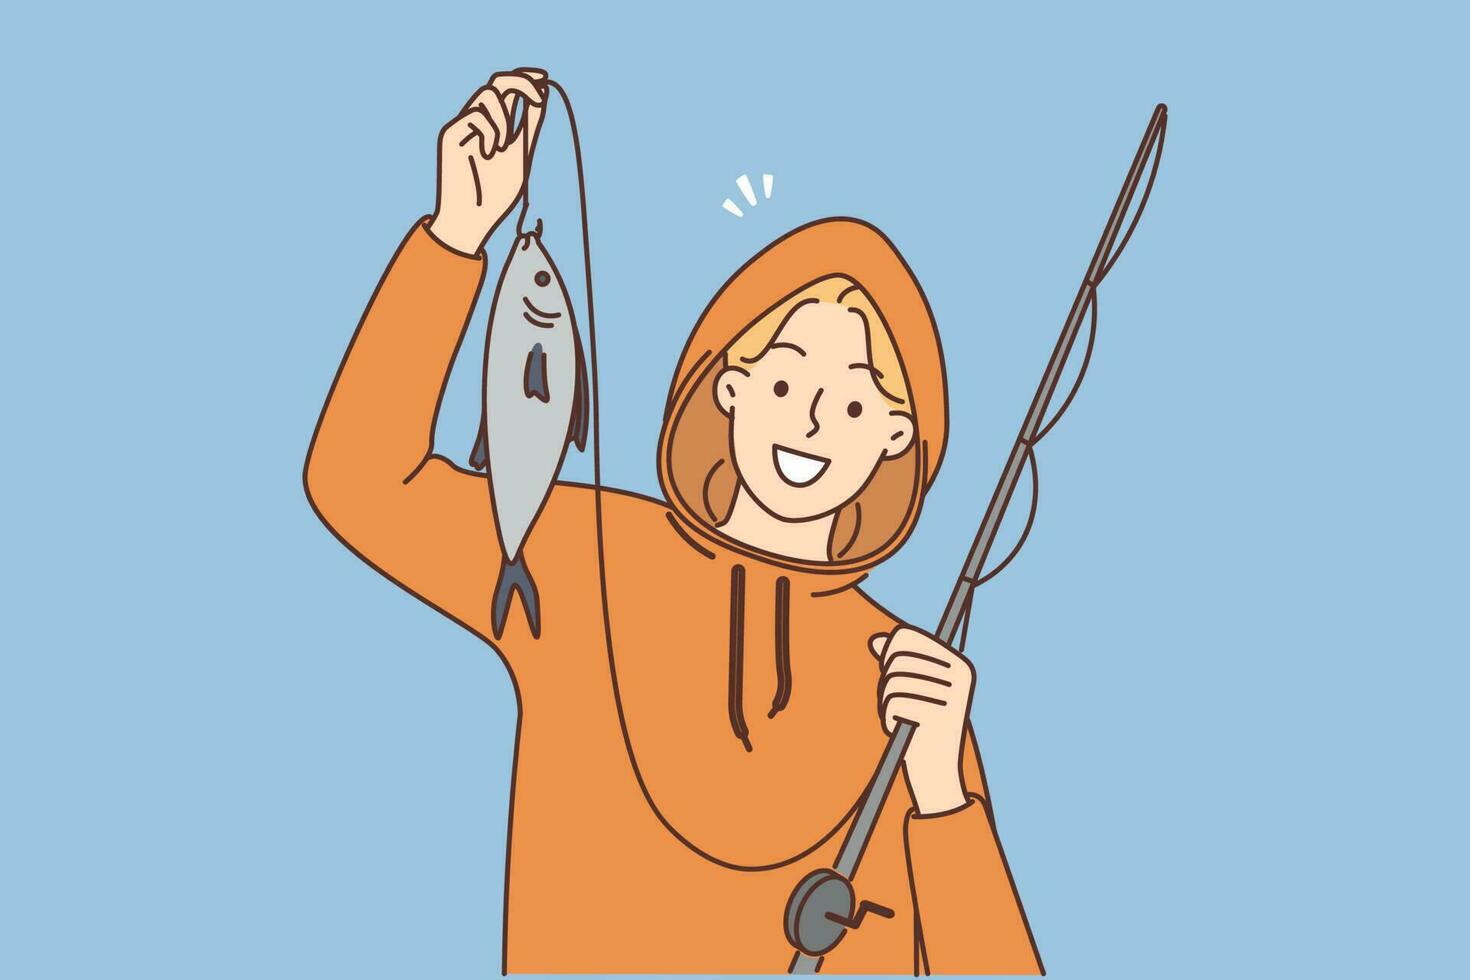 Smiling young man with rod in hands and fish excited with catch. Happy fisherman with carp enjoying hobby. Vector illustration.